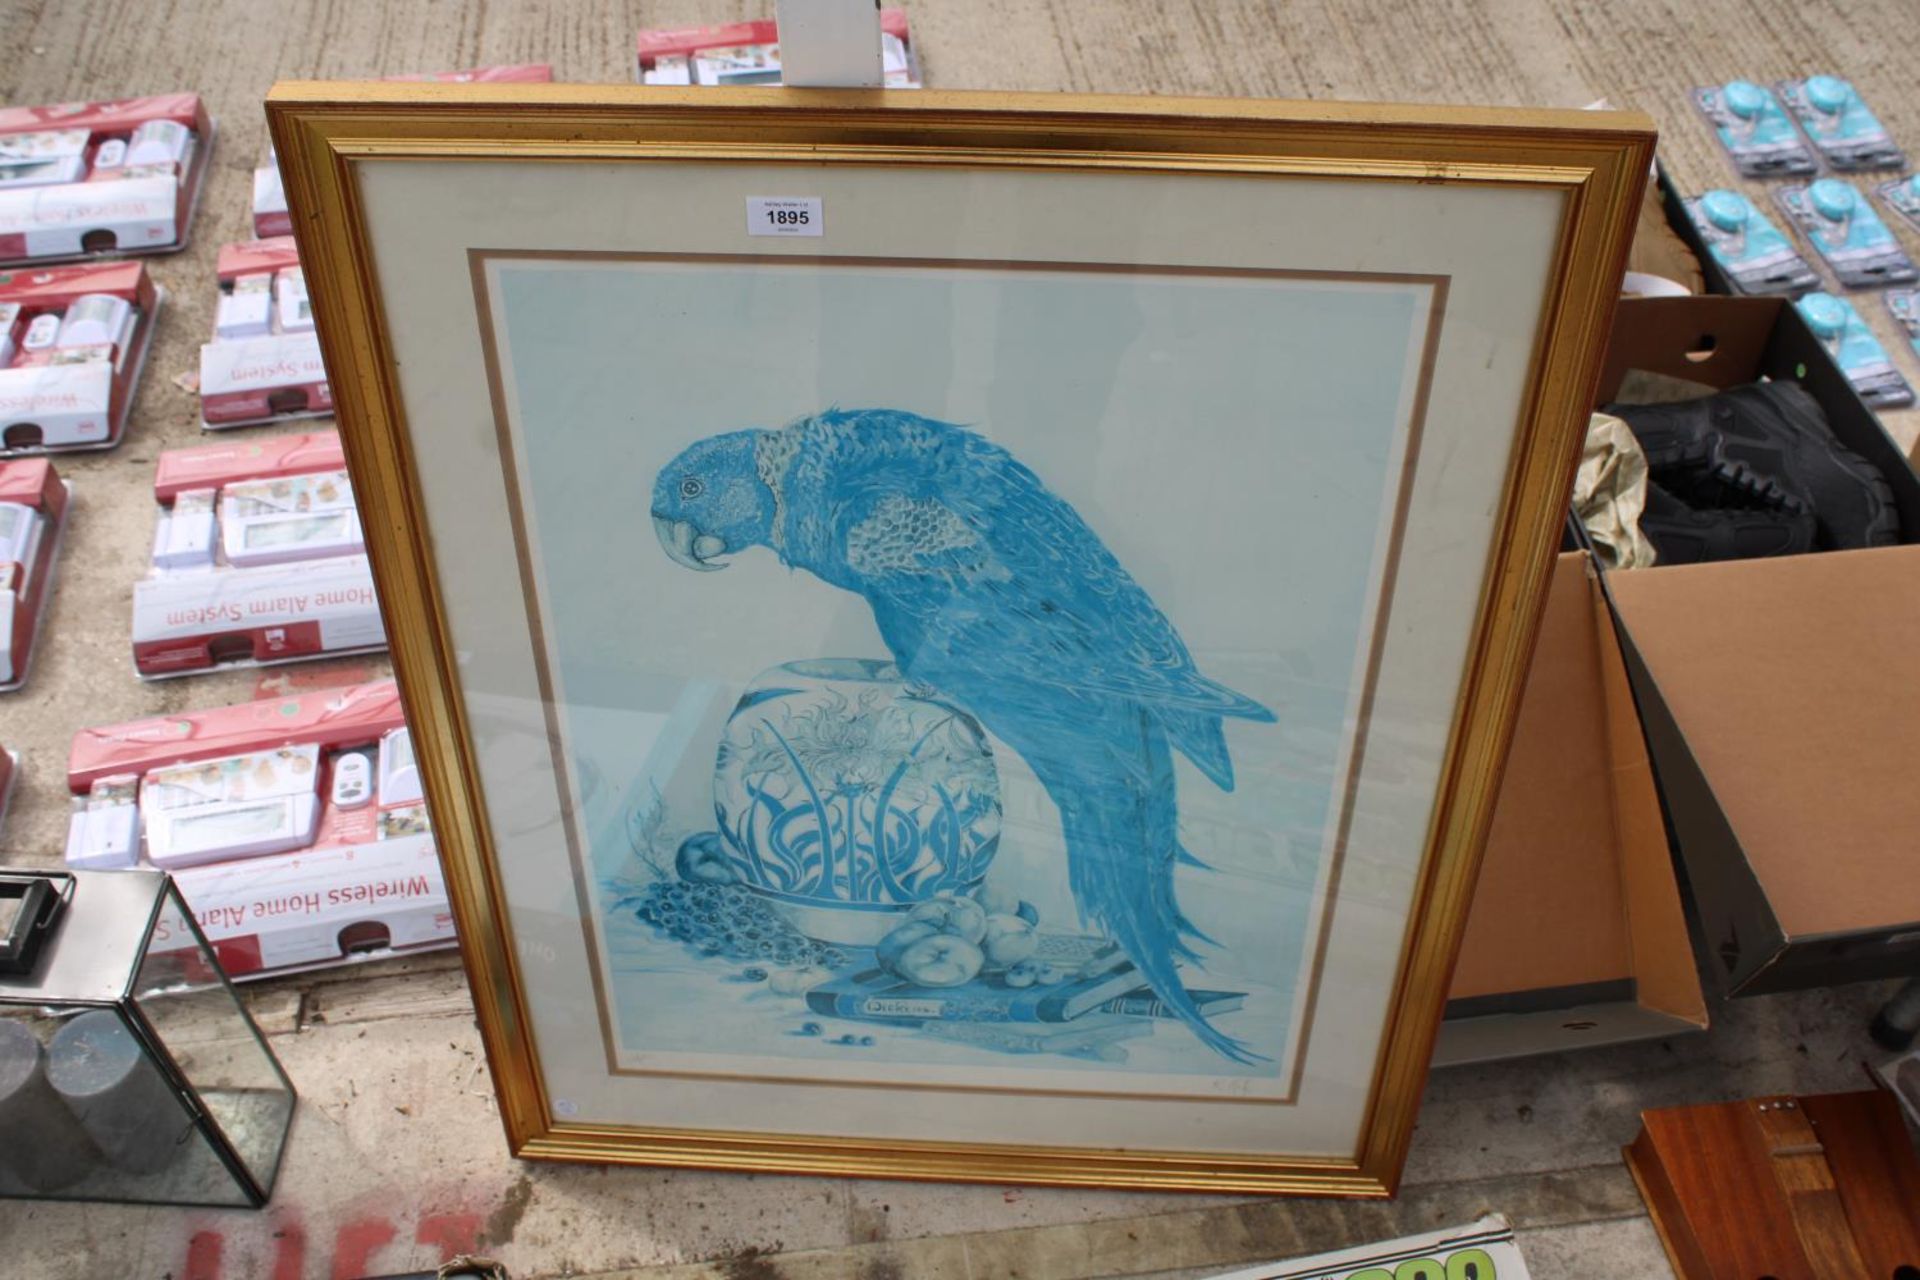 A LIMITED EDITION 5/100 PRINT OF A PARROT SIGNED K.ROLFE TO LOWER RIGHT CORNER